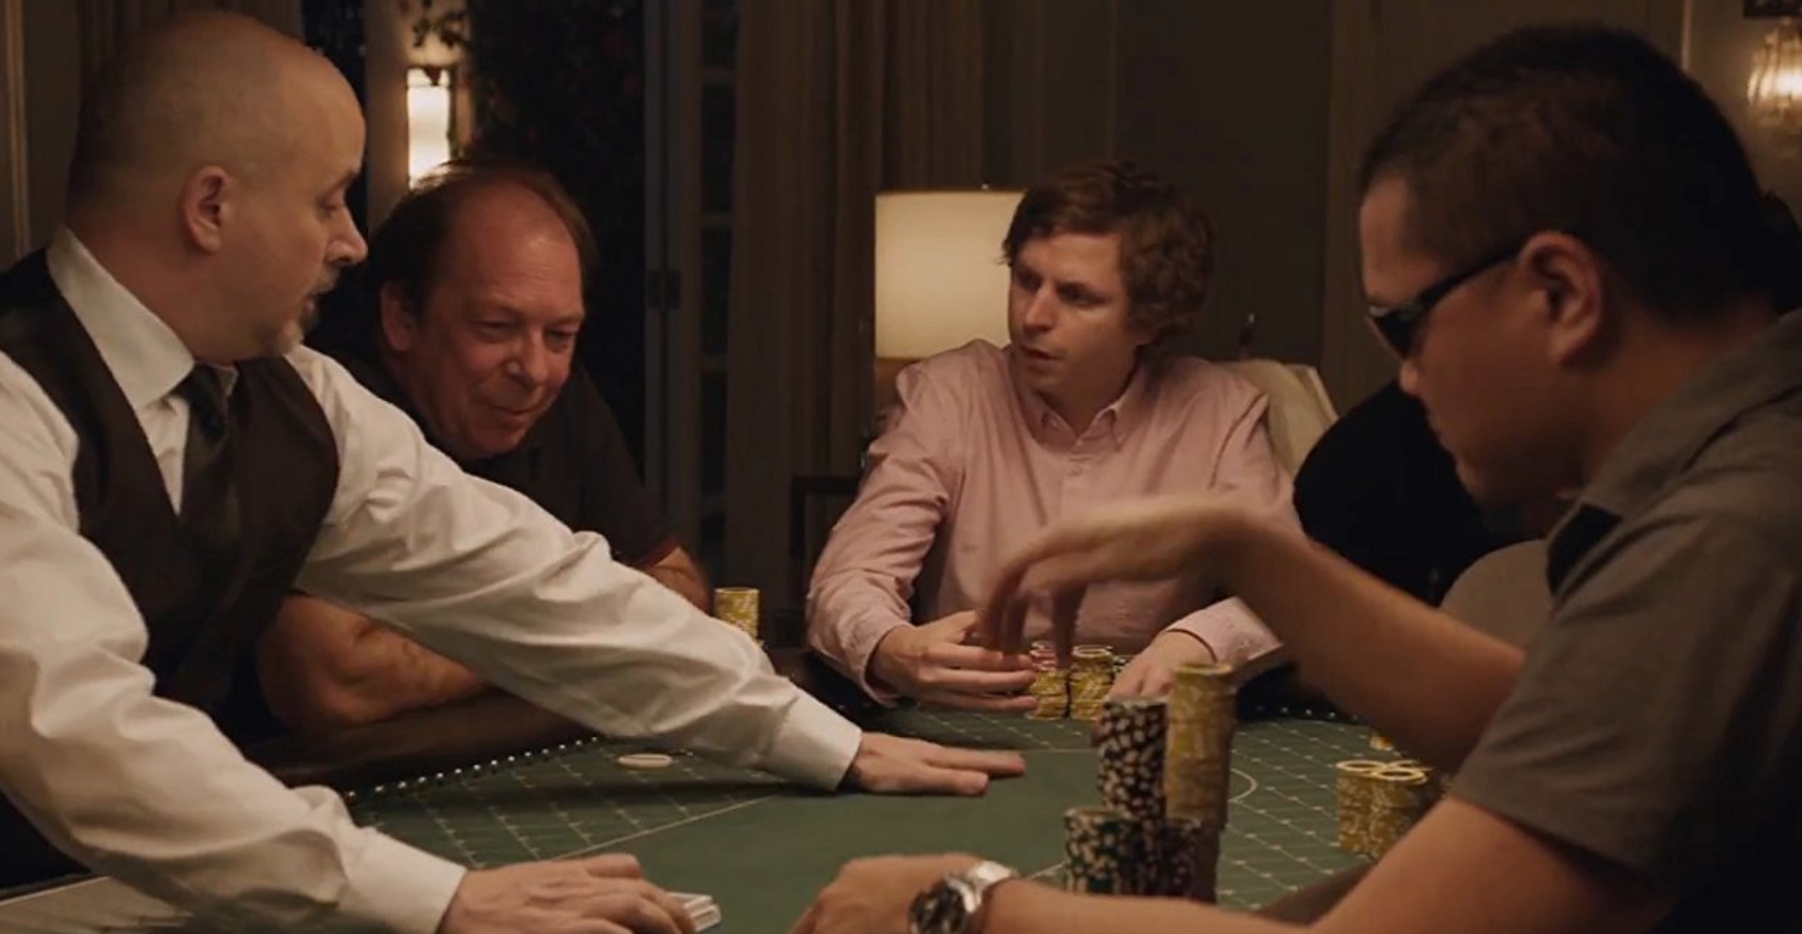 Michael Cera and other movie poker players in the film Molly's Game